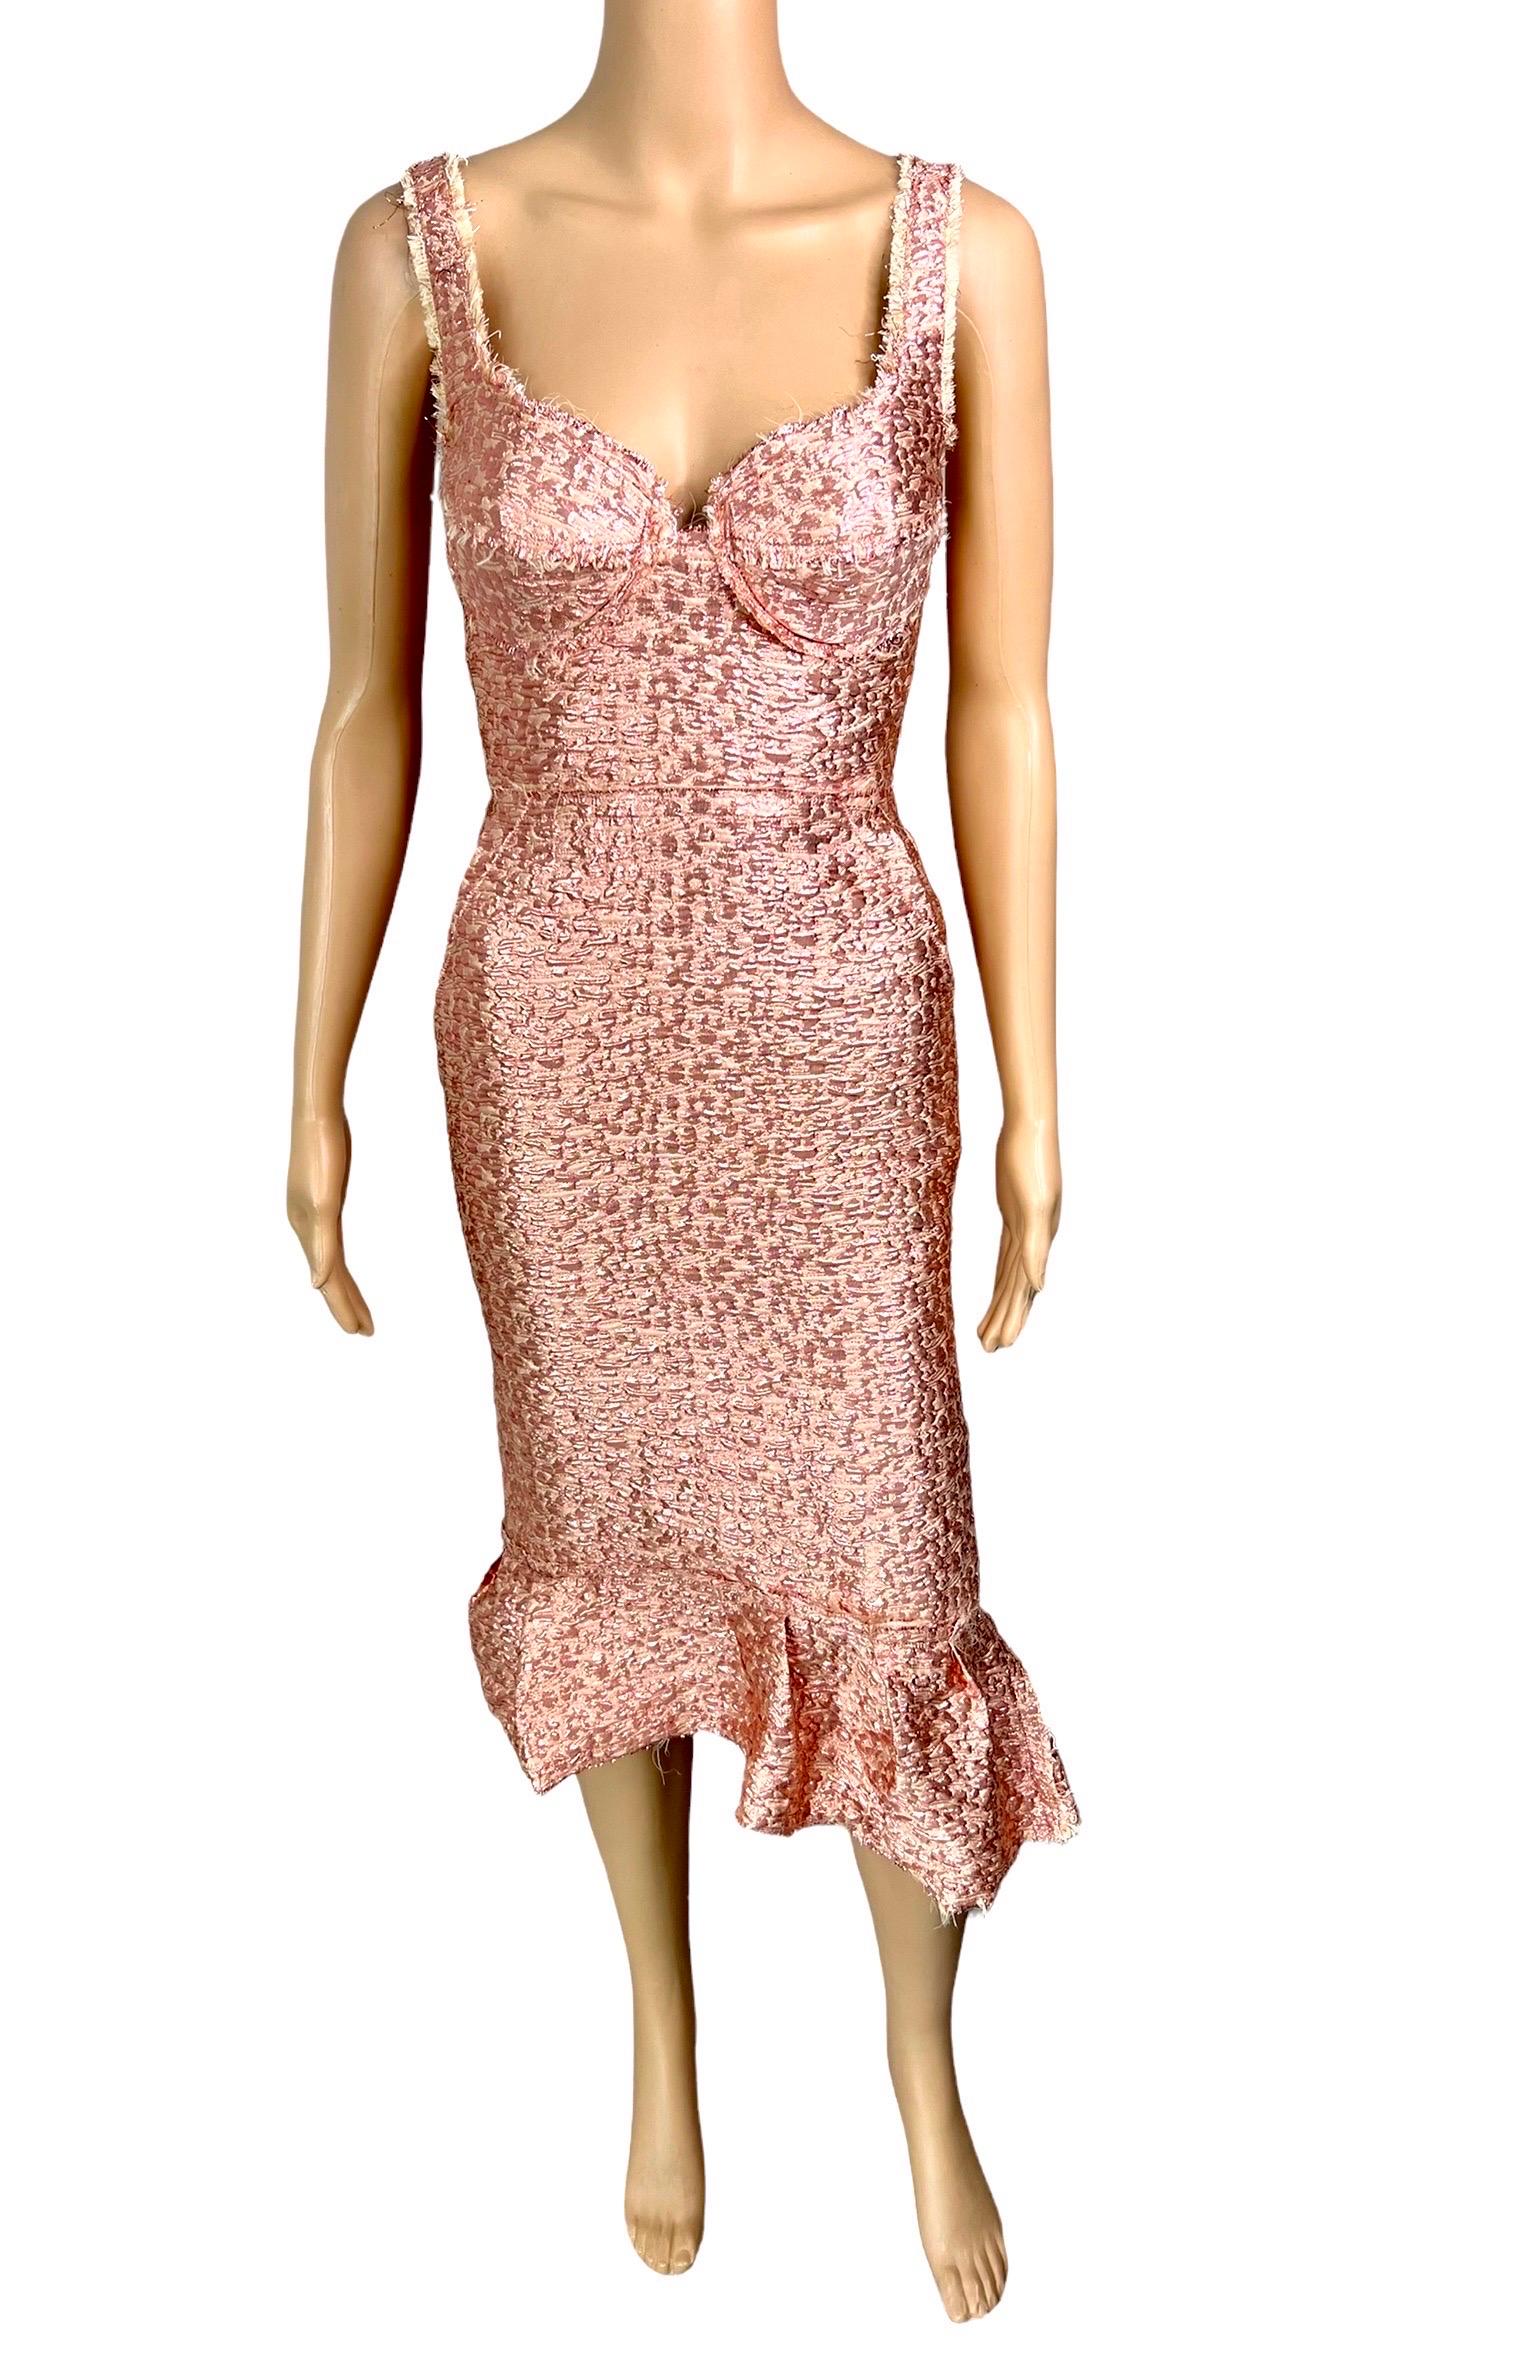 Lanvin S/S 2014 Runway Bustier Metallic Jacquard Distressed Midi Dress In Excellent Condition For Sale In Naples, FL